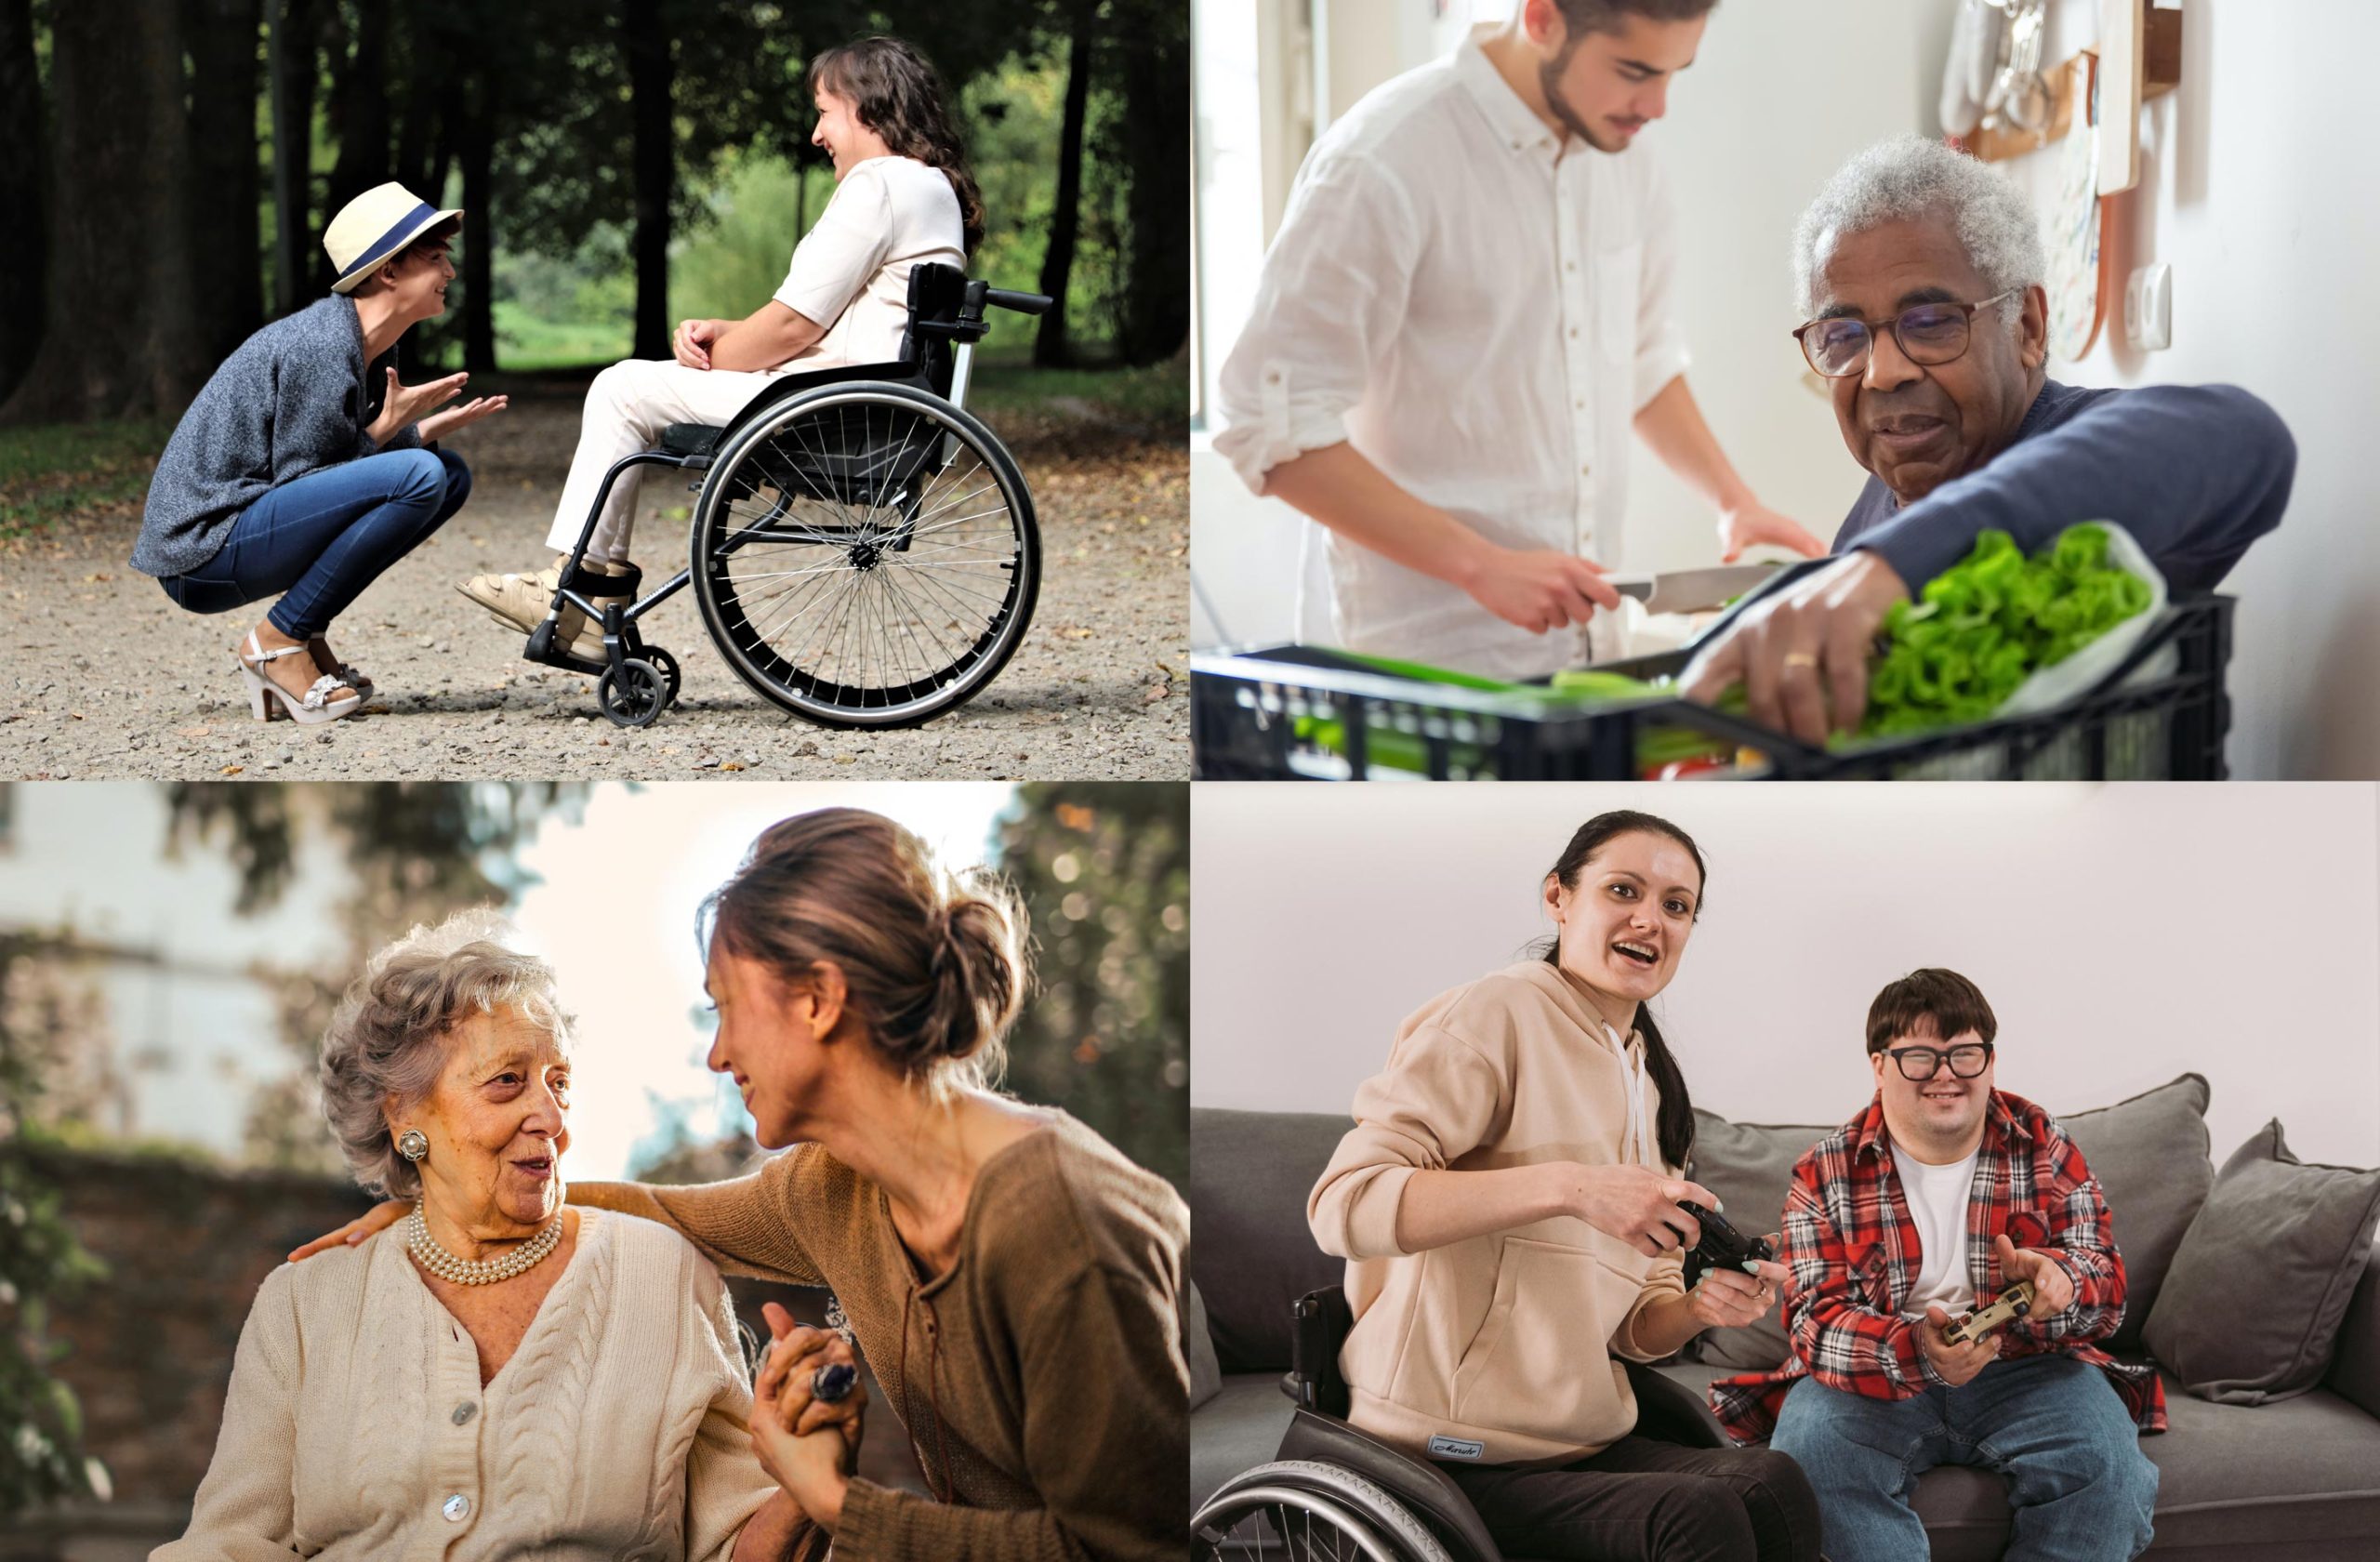 4 pictures of the kinds of high quality support and assistance Applied Socare provide in the NDIS funded categories of accommodation and tenancy, household tasks, travel and transport arrangements, innovative community participation, and in aged care